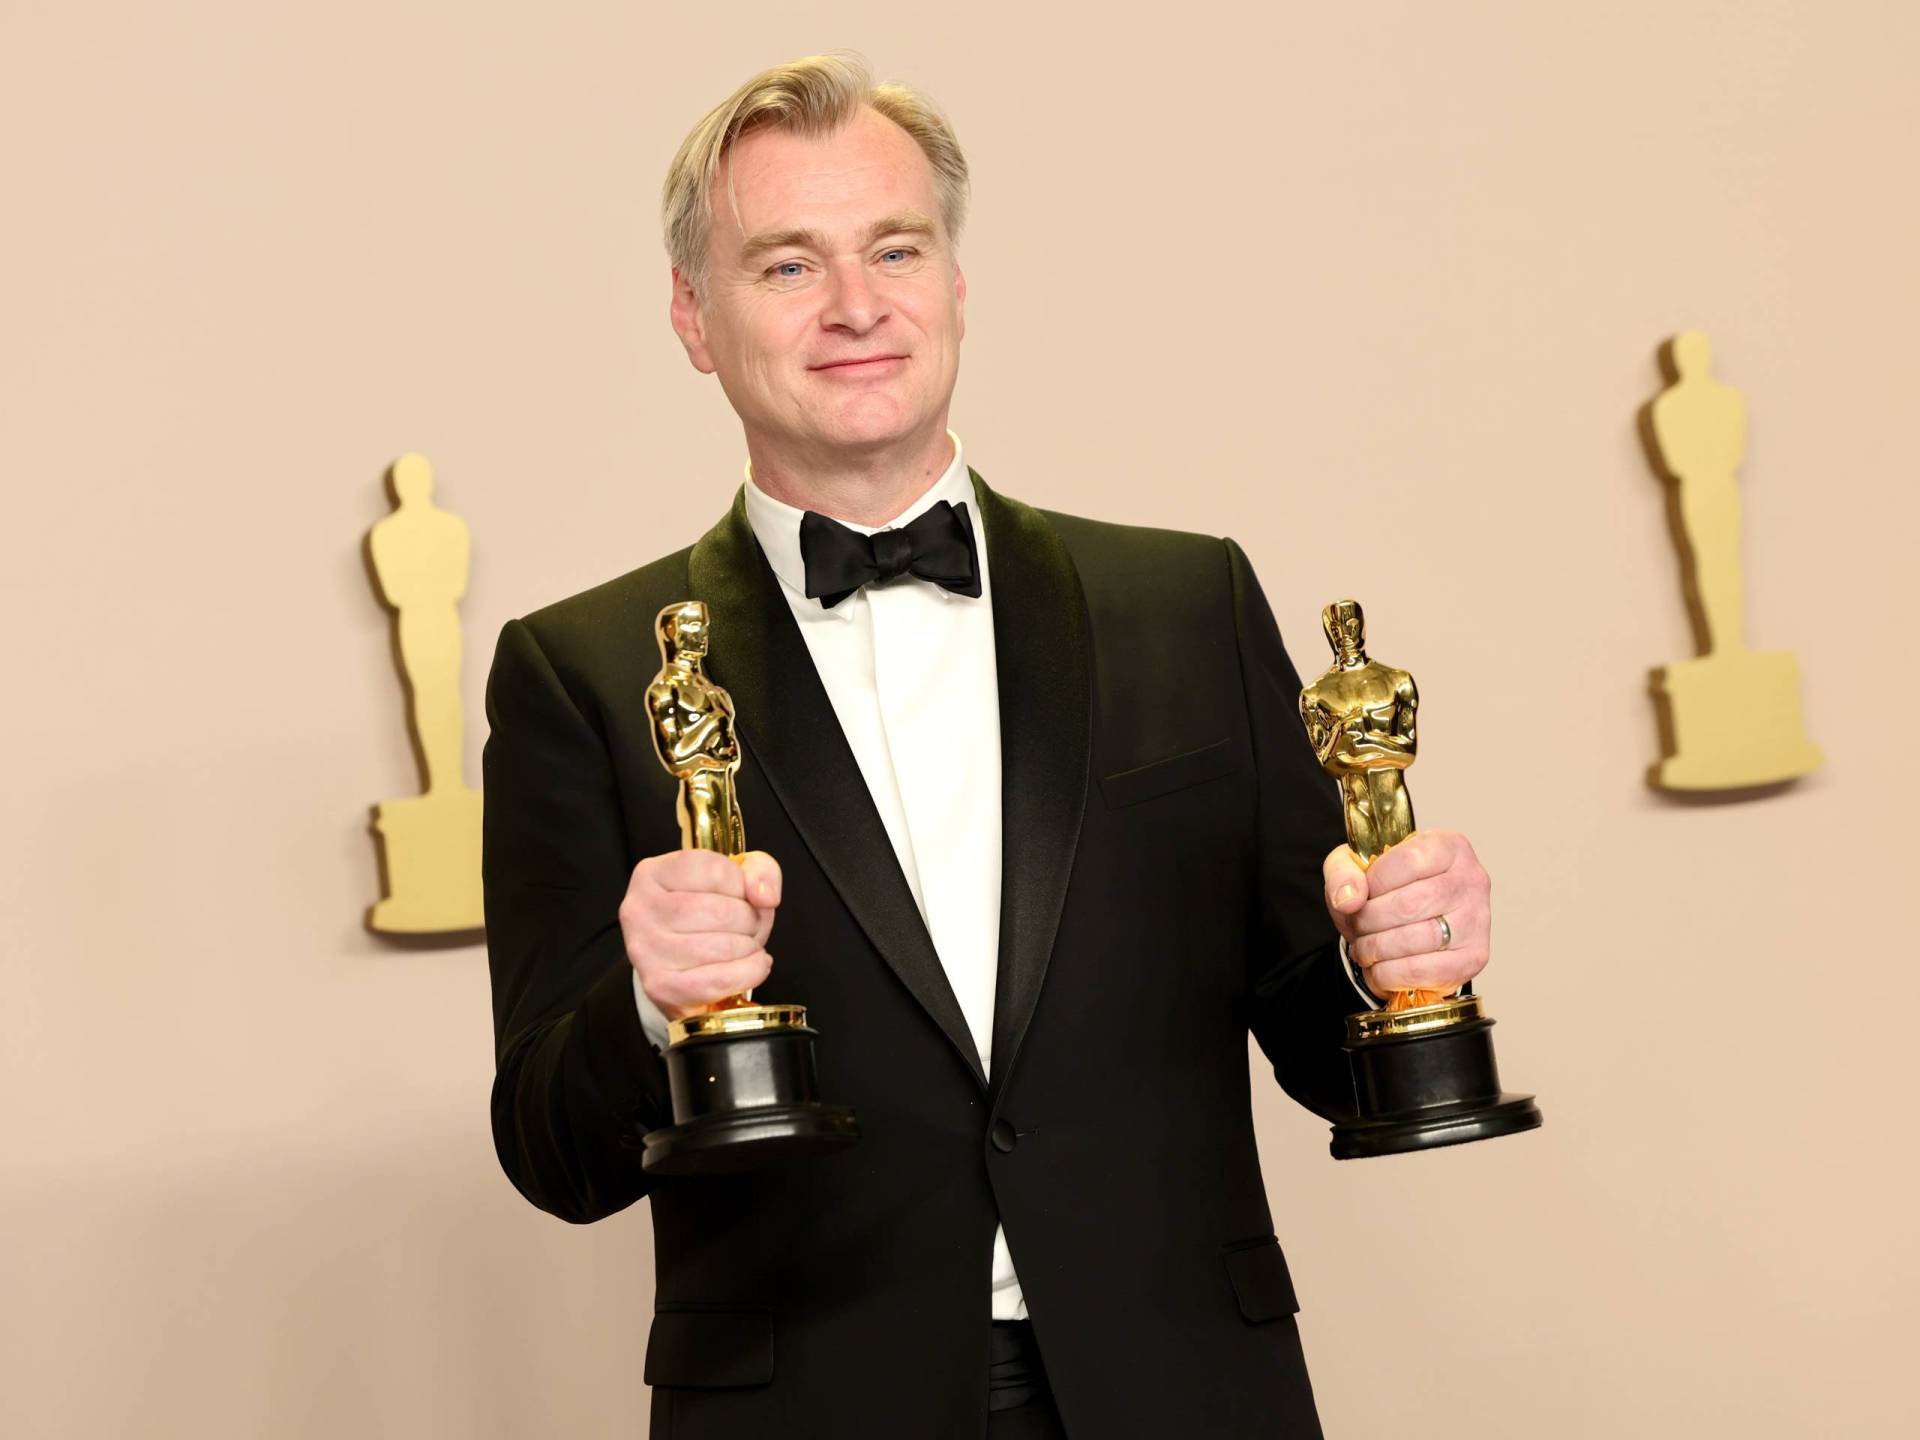 A white man in a tuxedo holds up two gold Oscar statues.